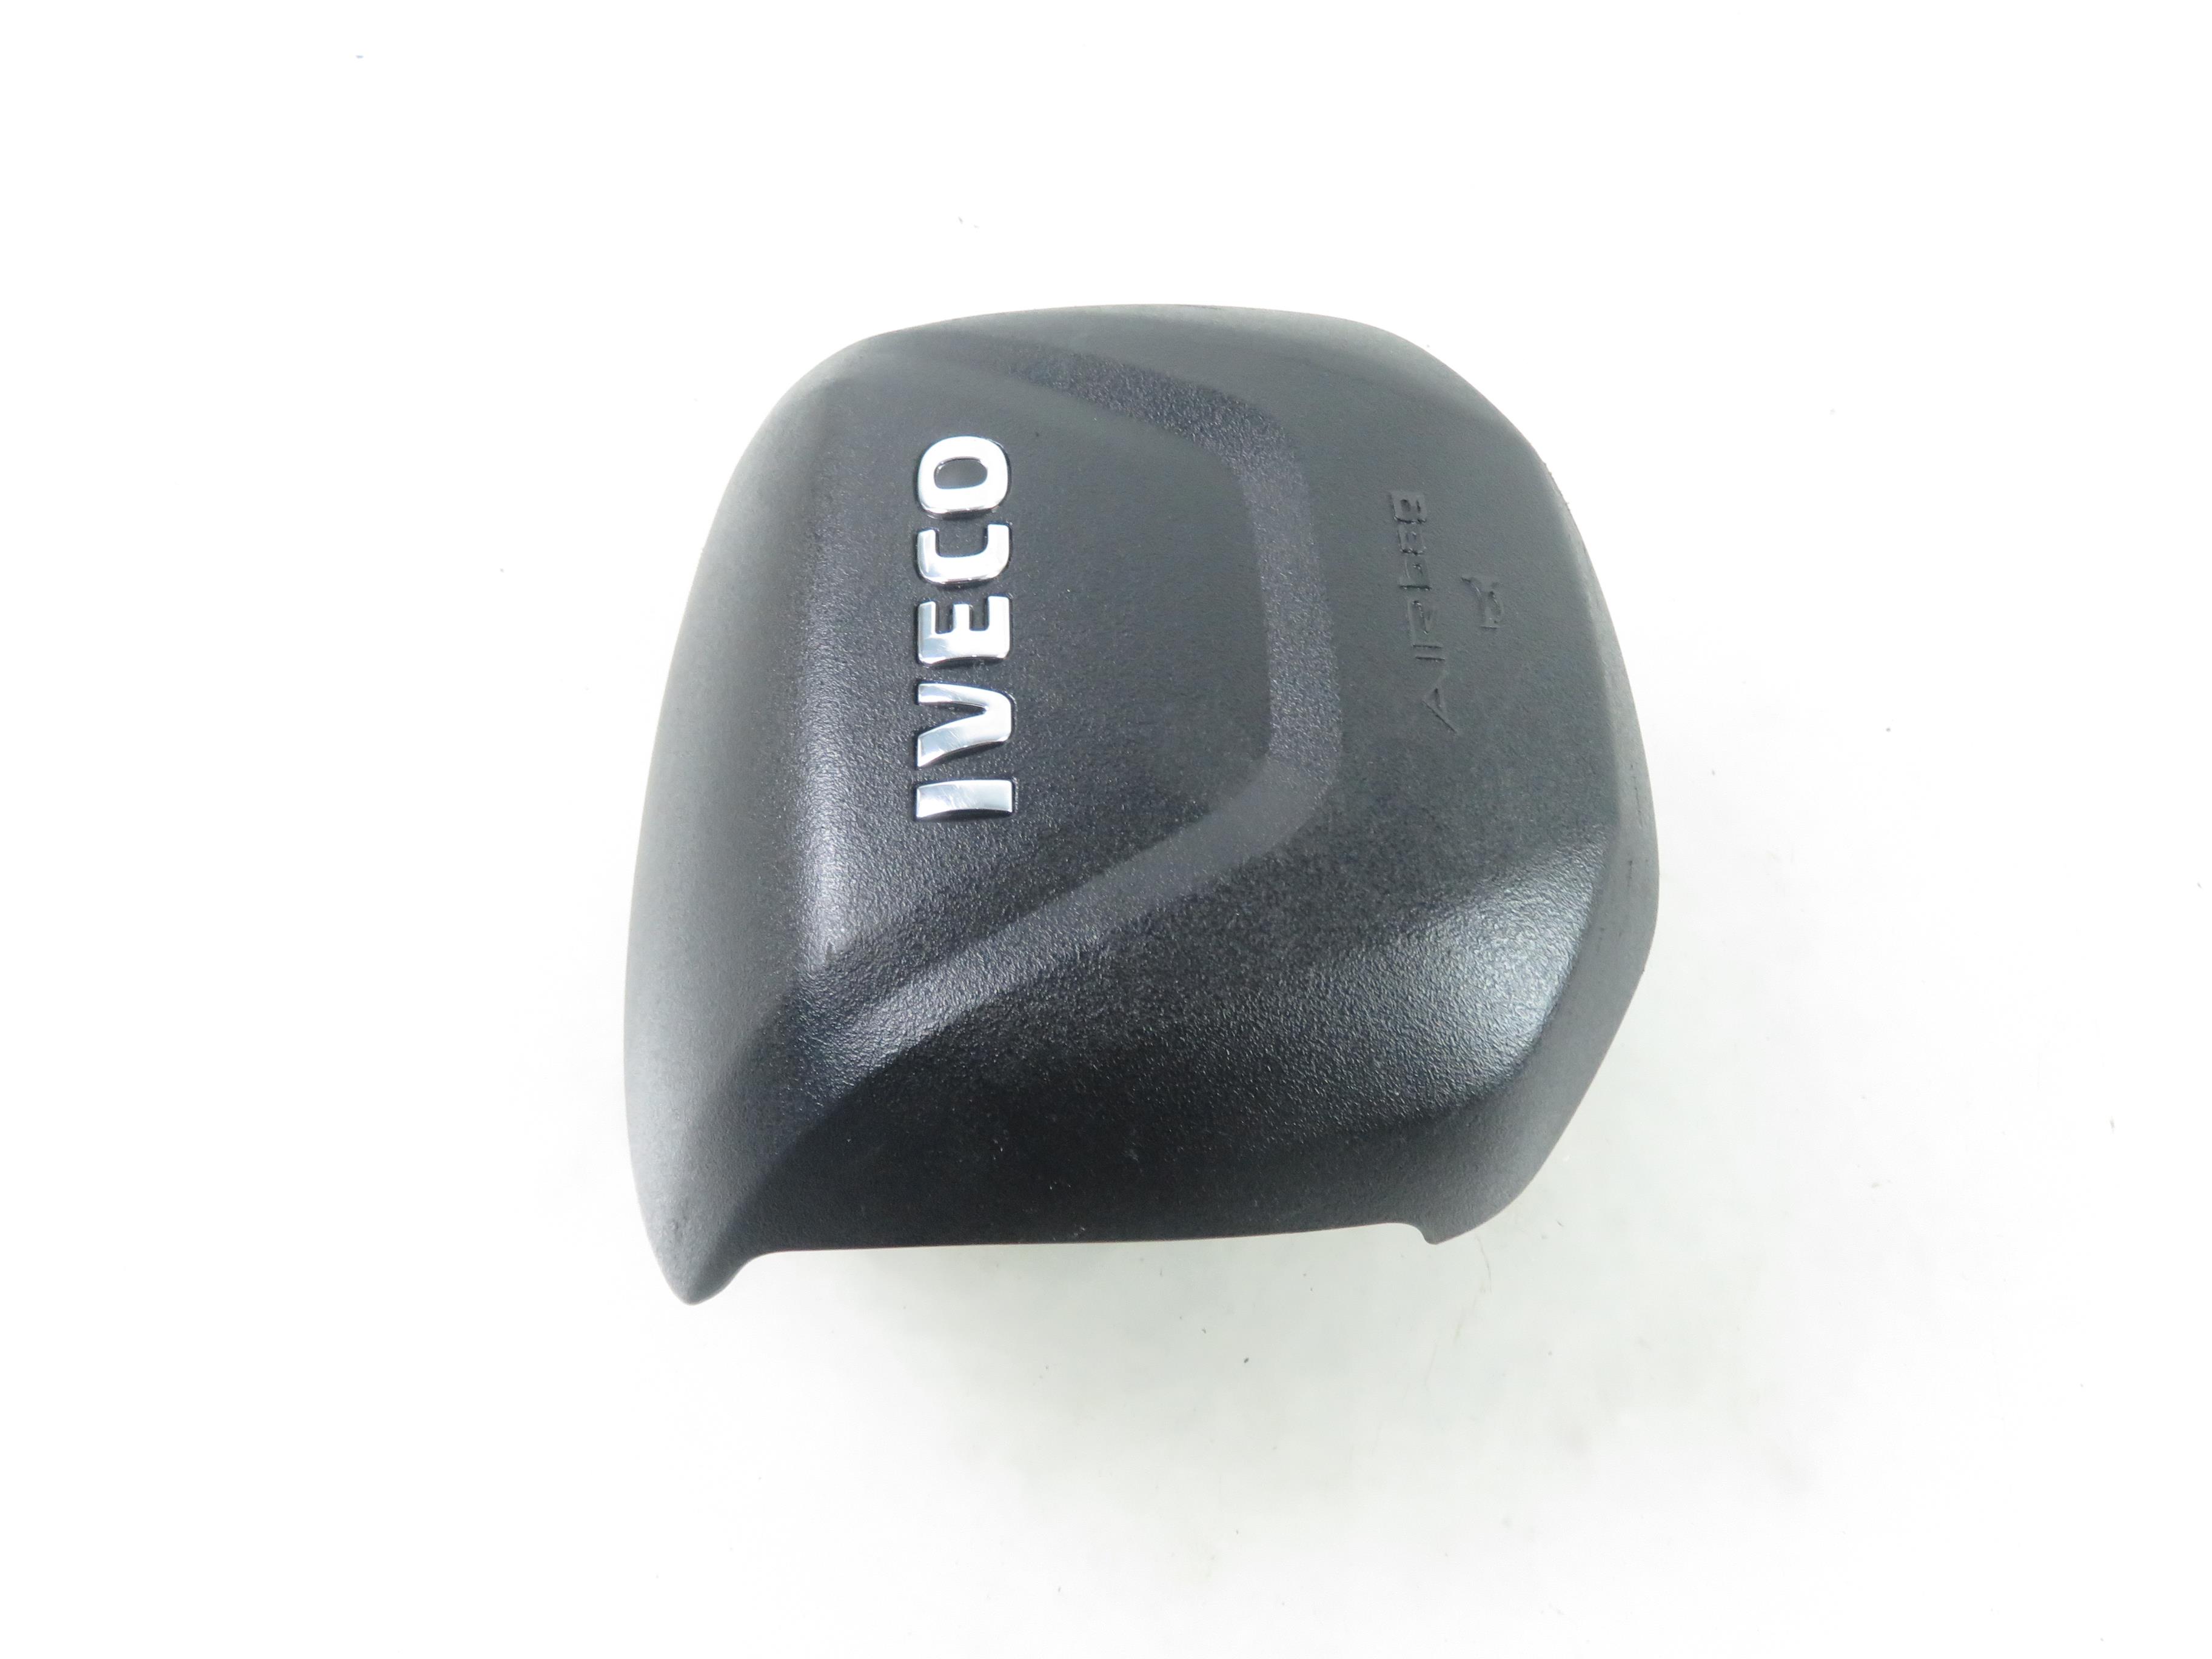 IVECO Daily 7 generation (2019-2024) Rat Airbag 5802279482 25289780